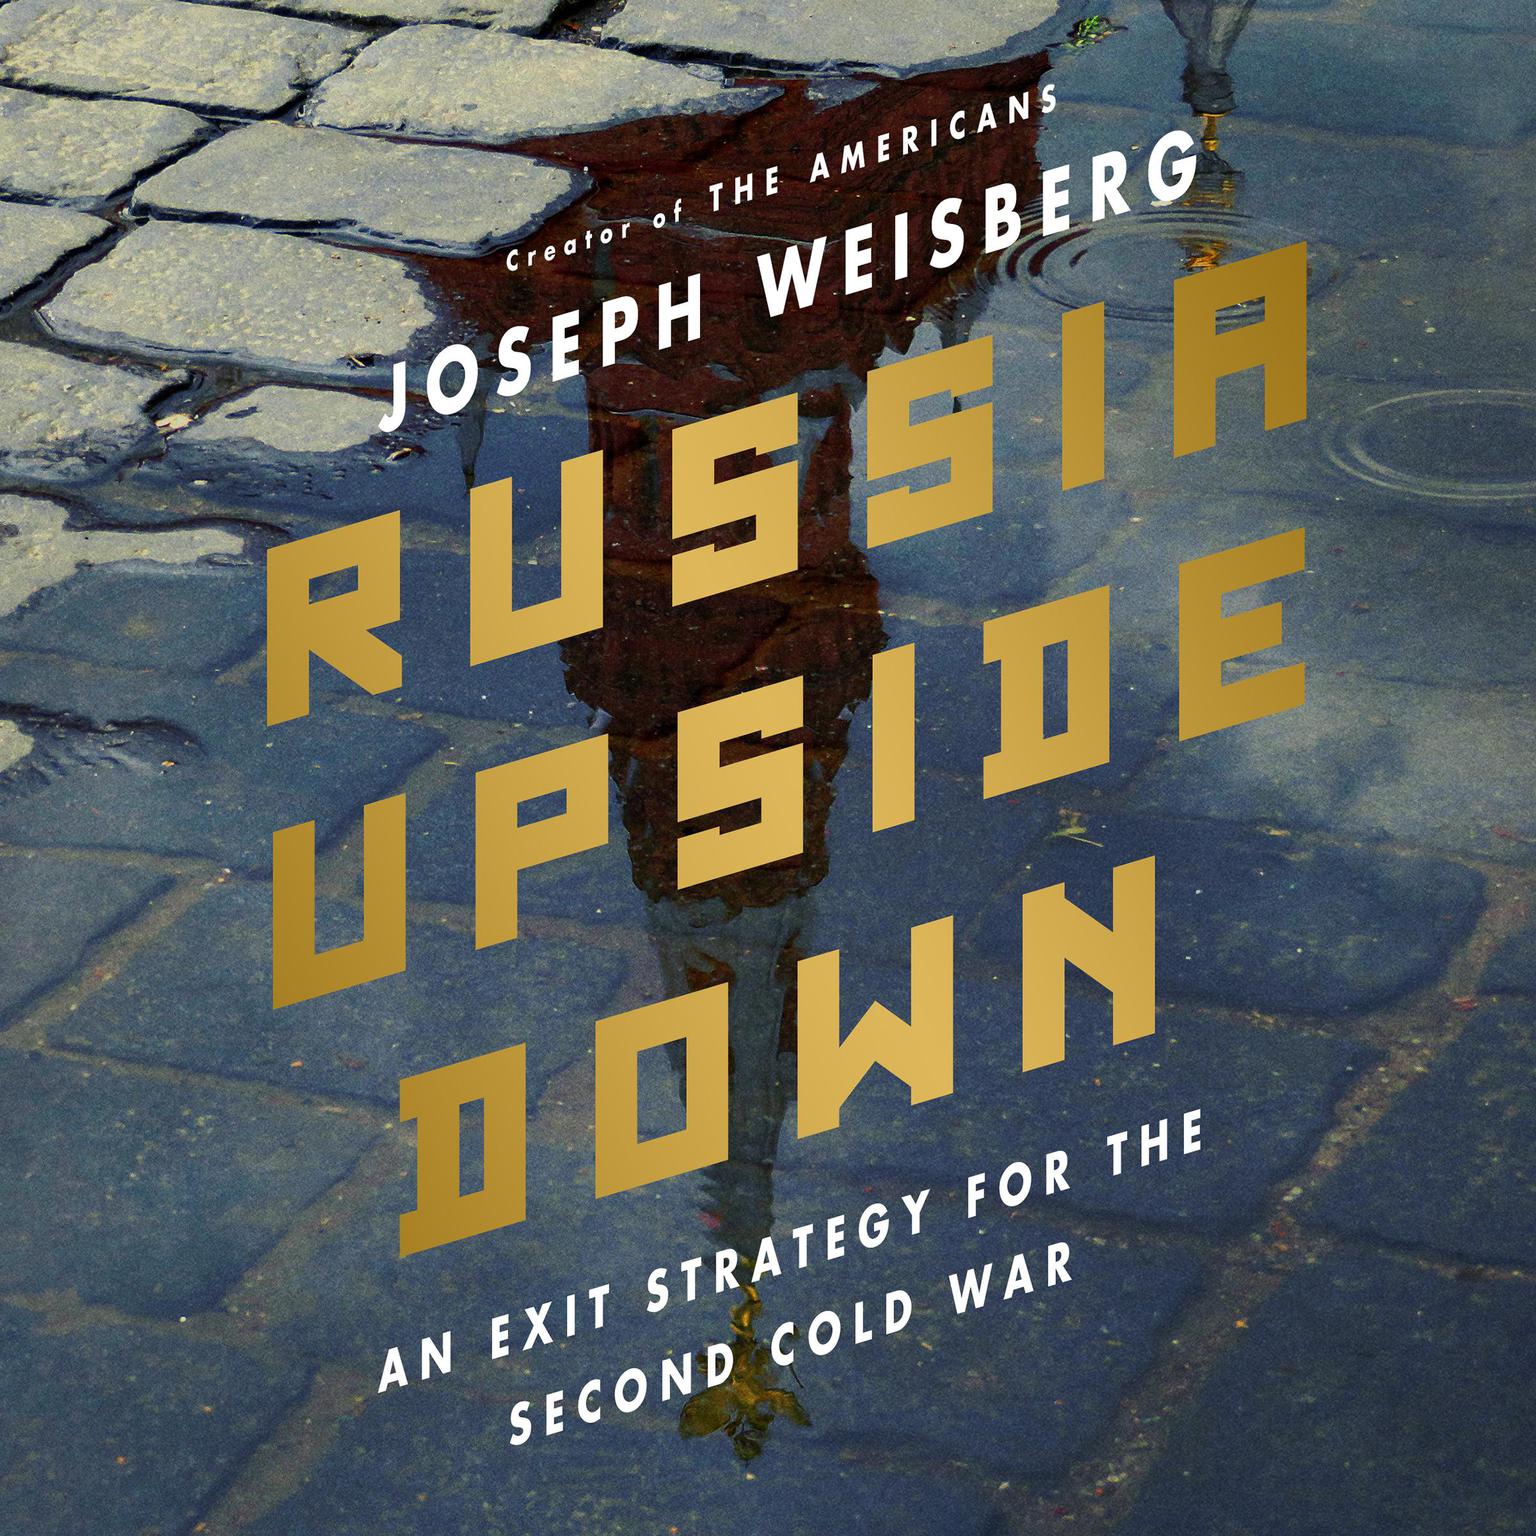 Russia Upside Down: An Exit Strategy for the Second Cold War  Audiobook, by Joseph Weisberg